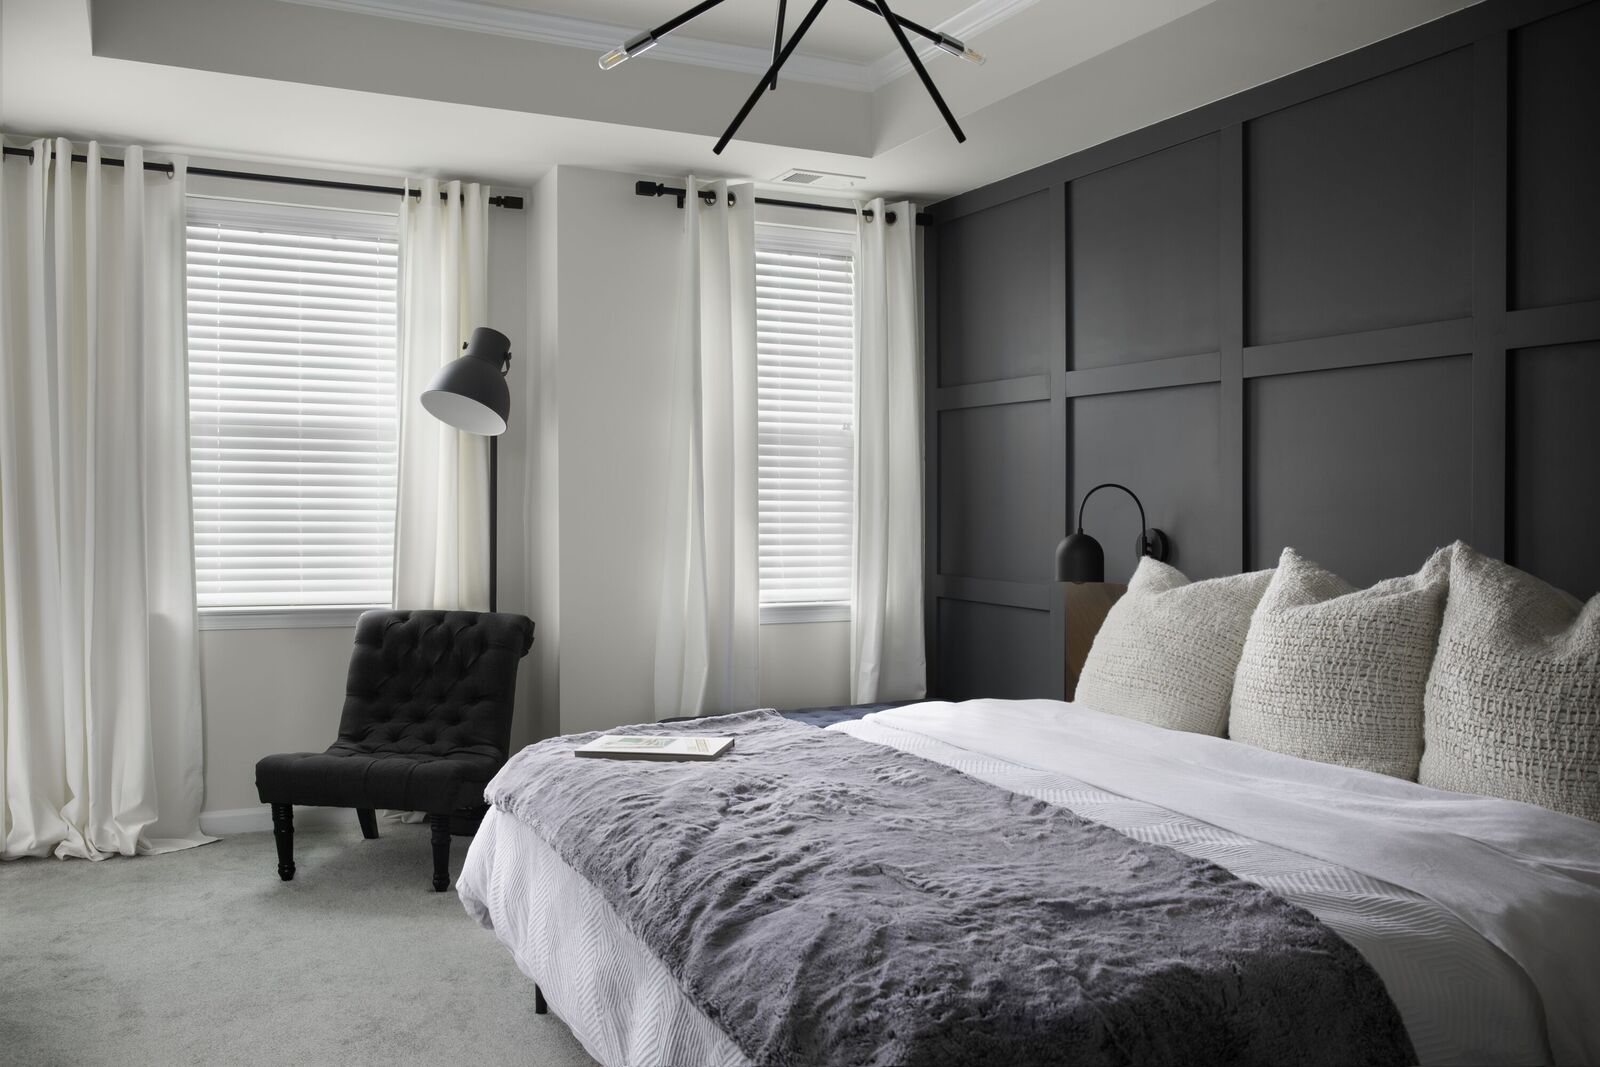 A modern bedroom features white drapery puddling on the flood and paired with white wood blinds.